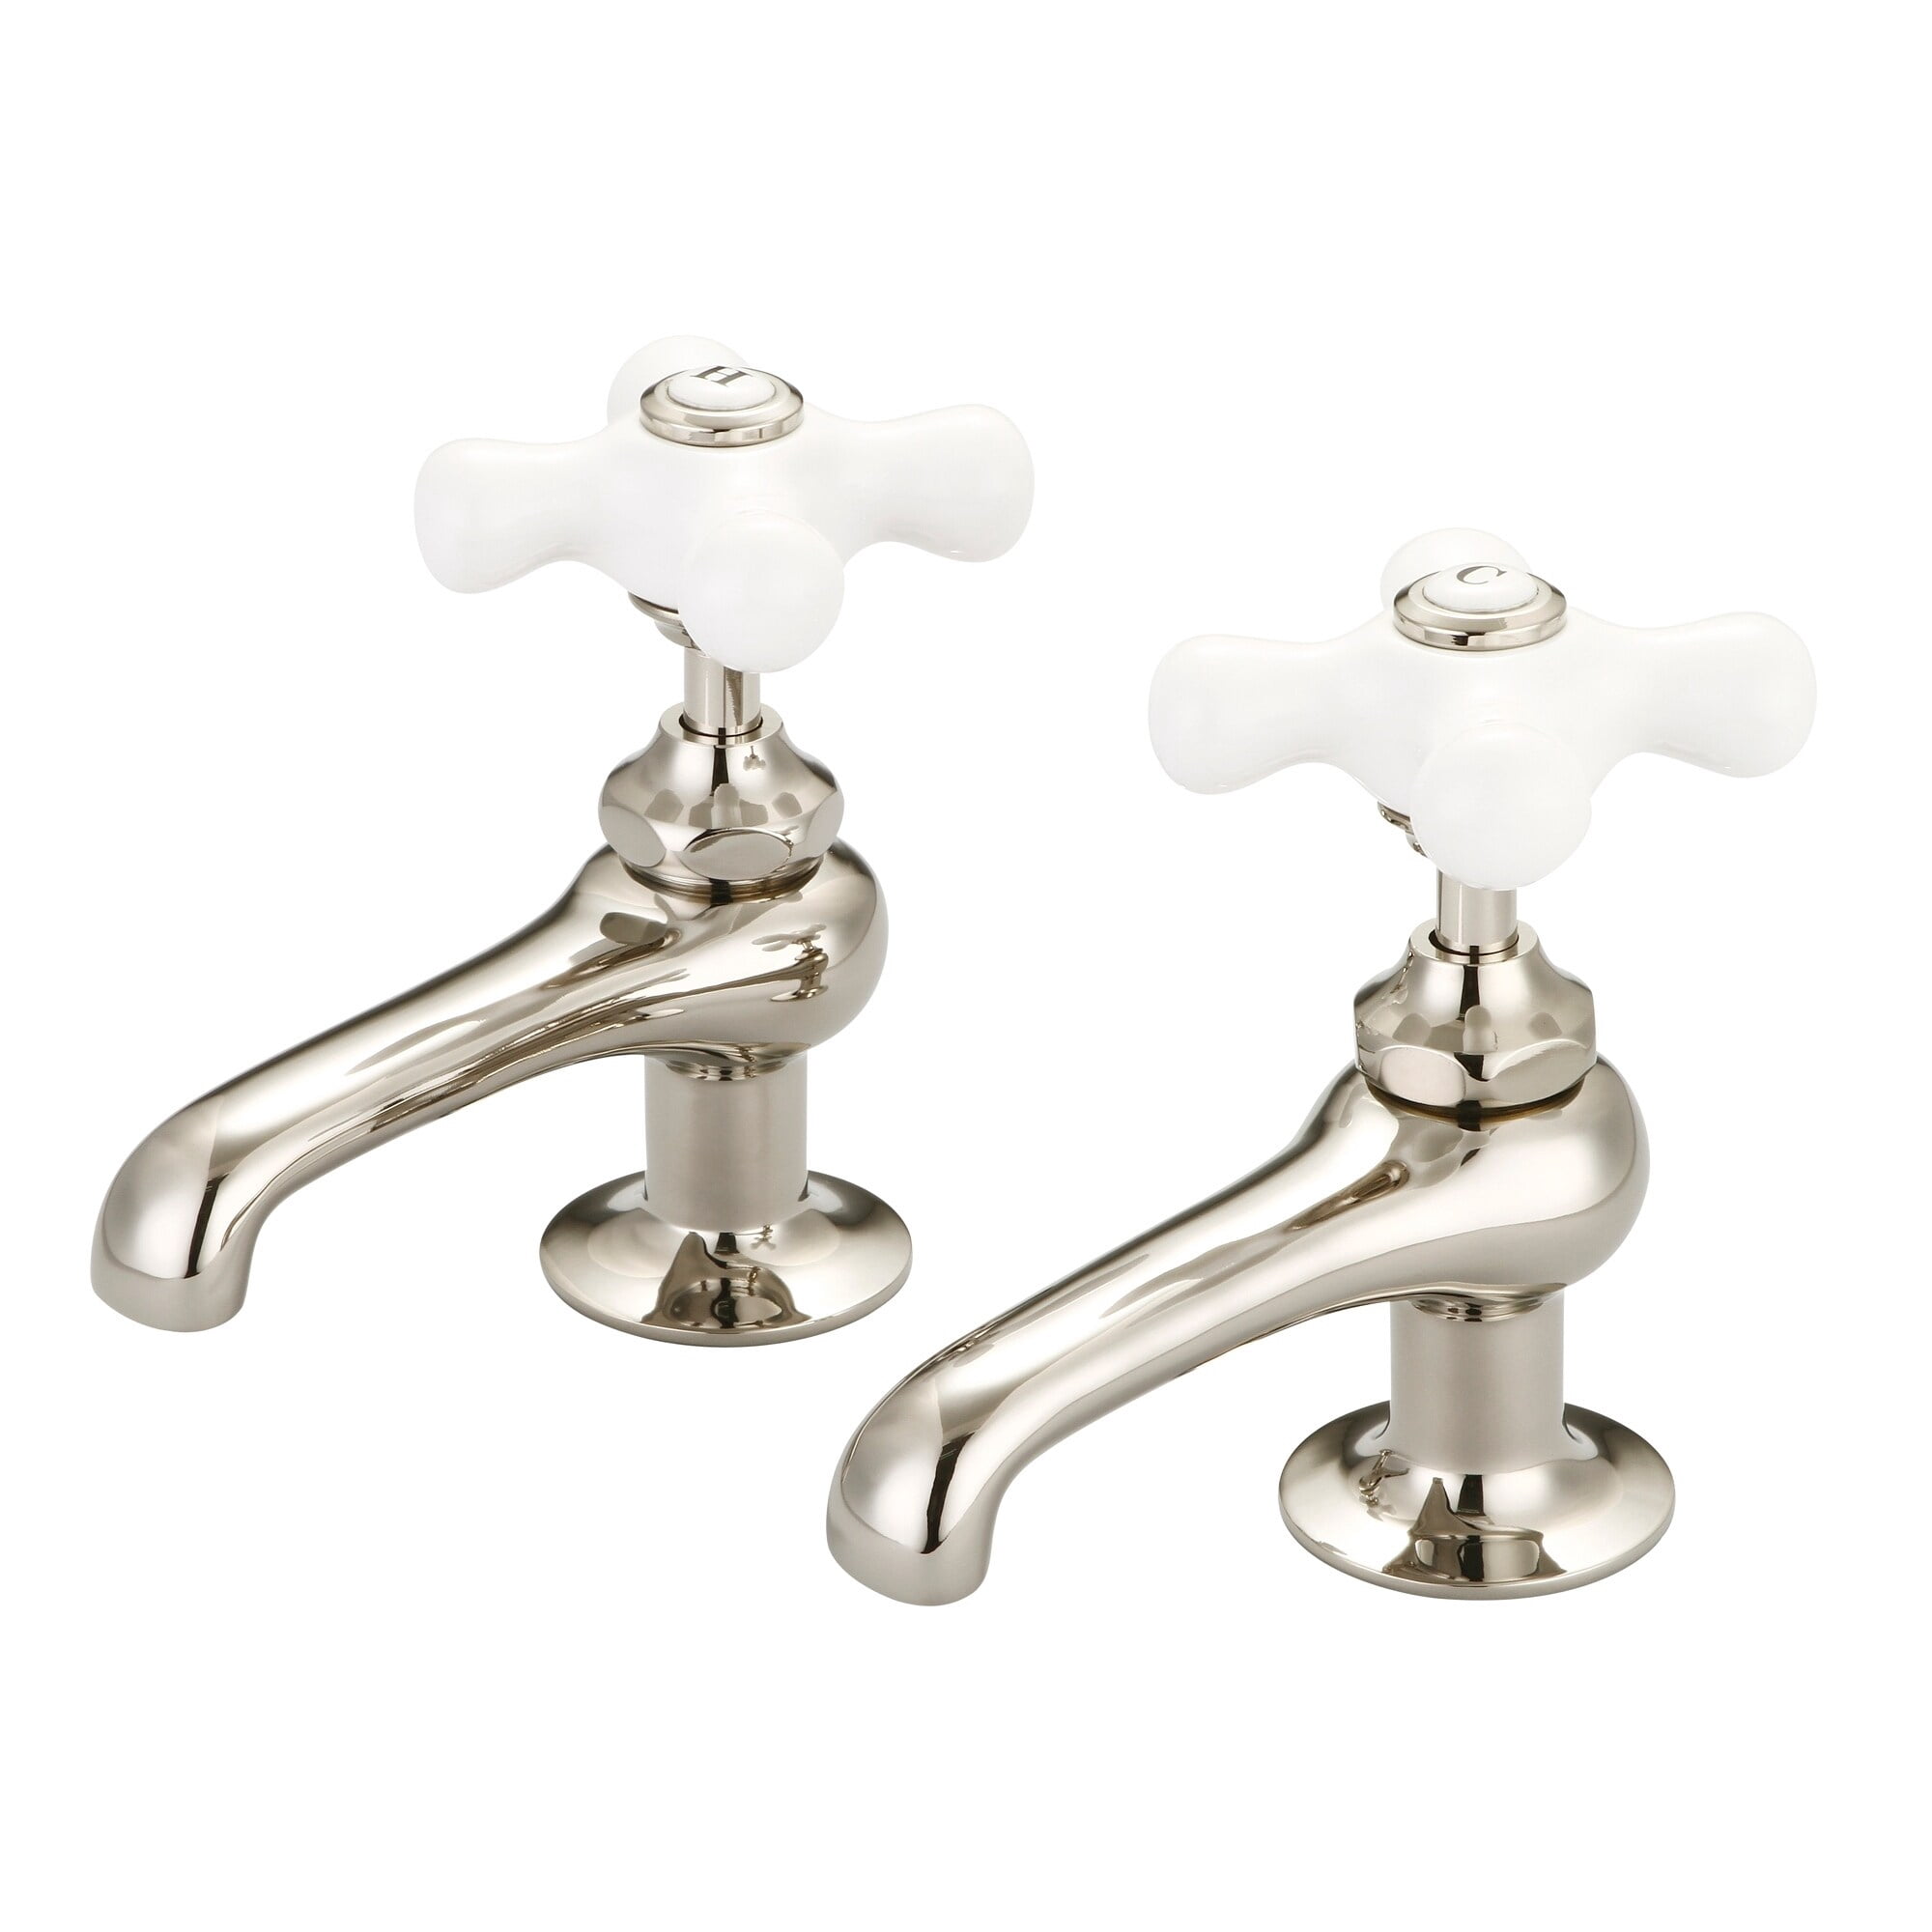 Juno Classic Antique Brass Wall Mount Bathroom Faucet with Hand Held Shower